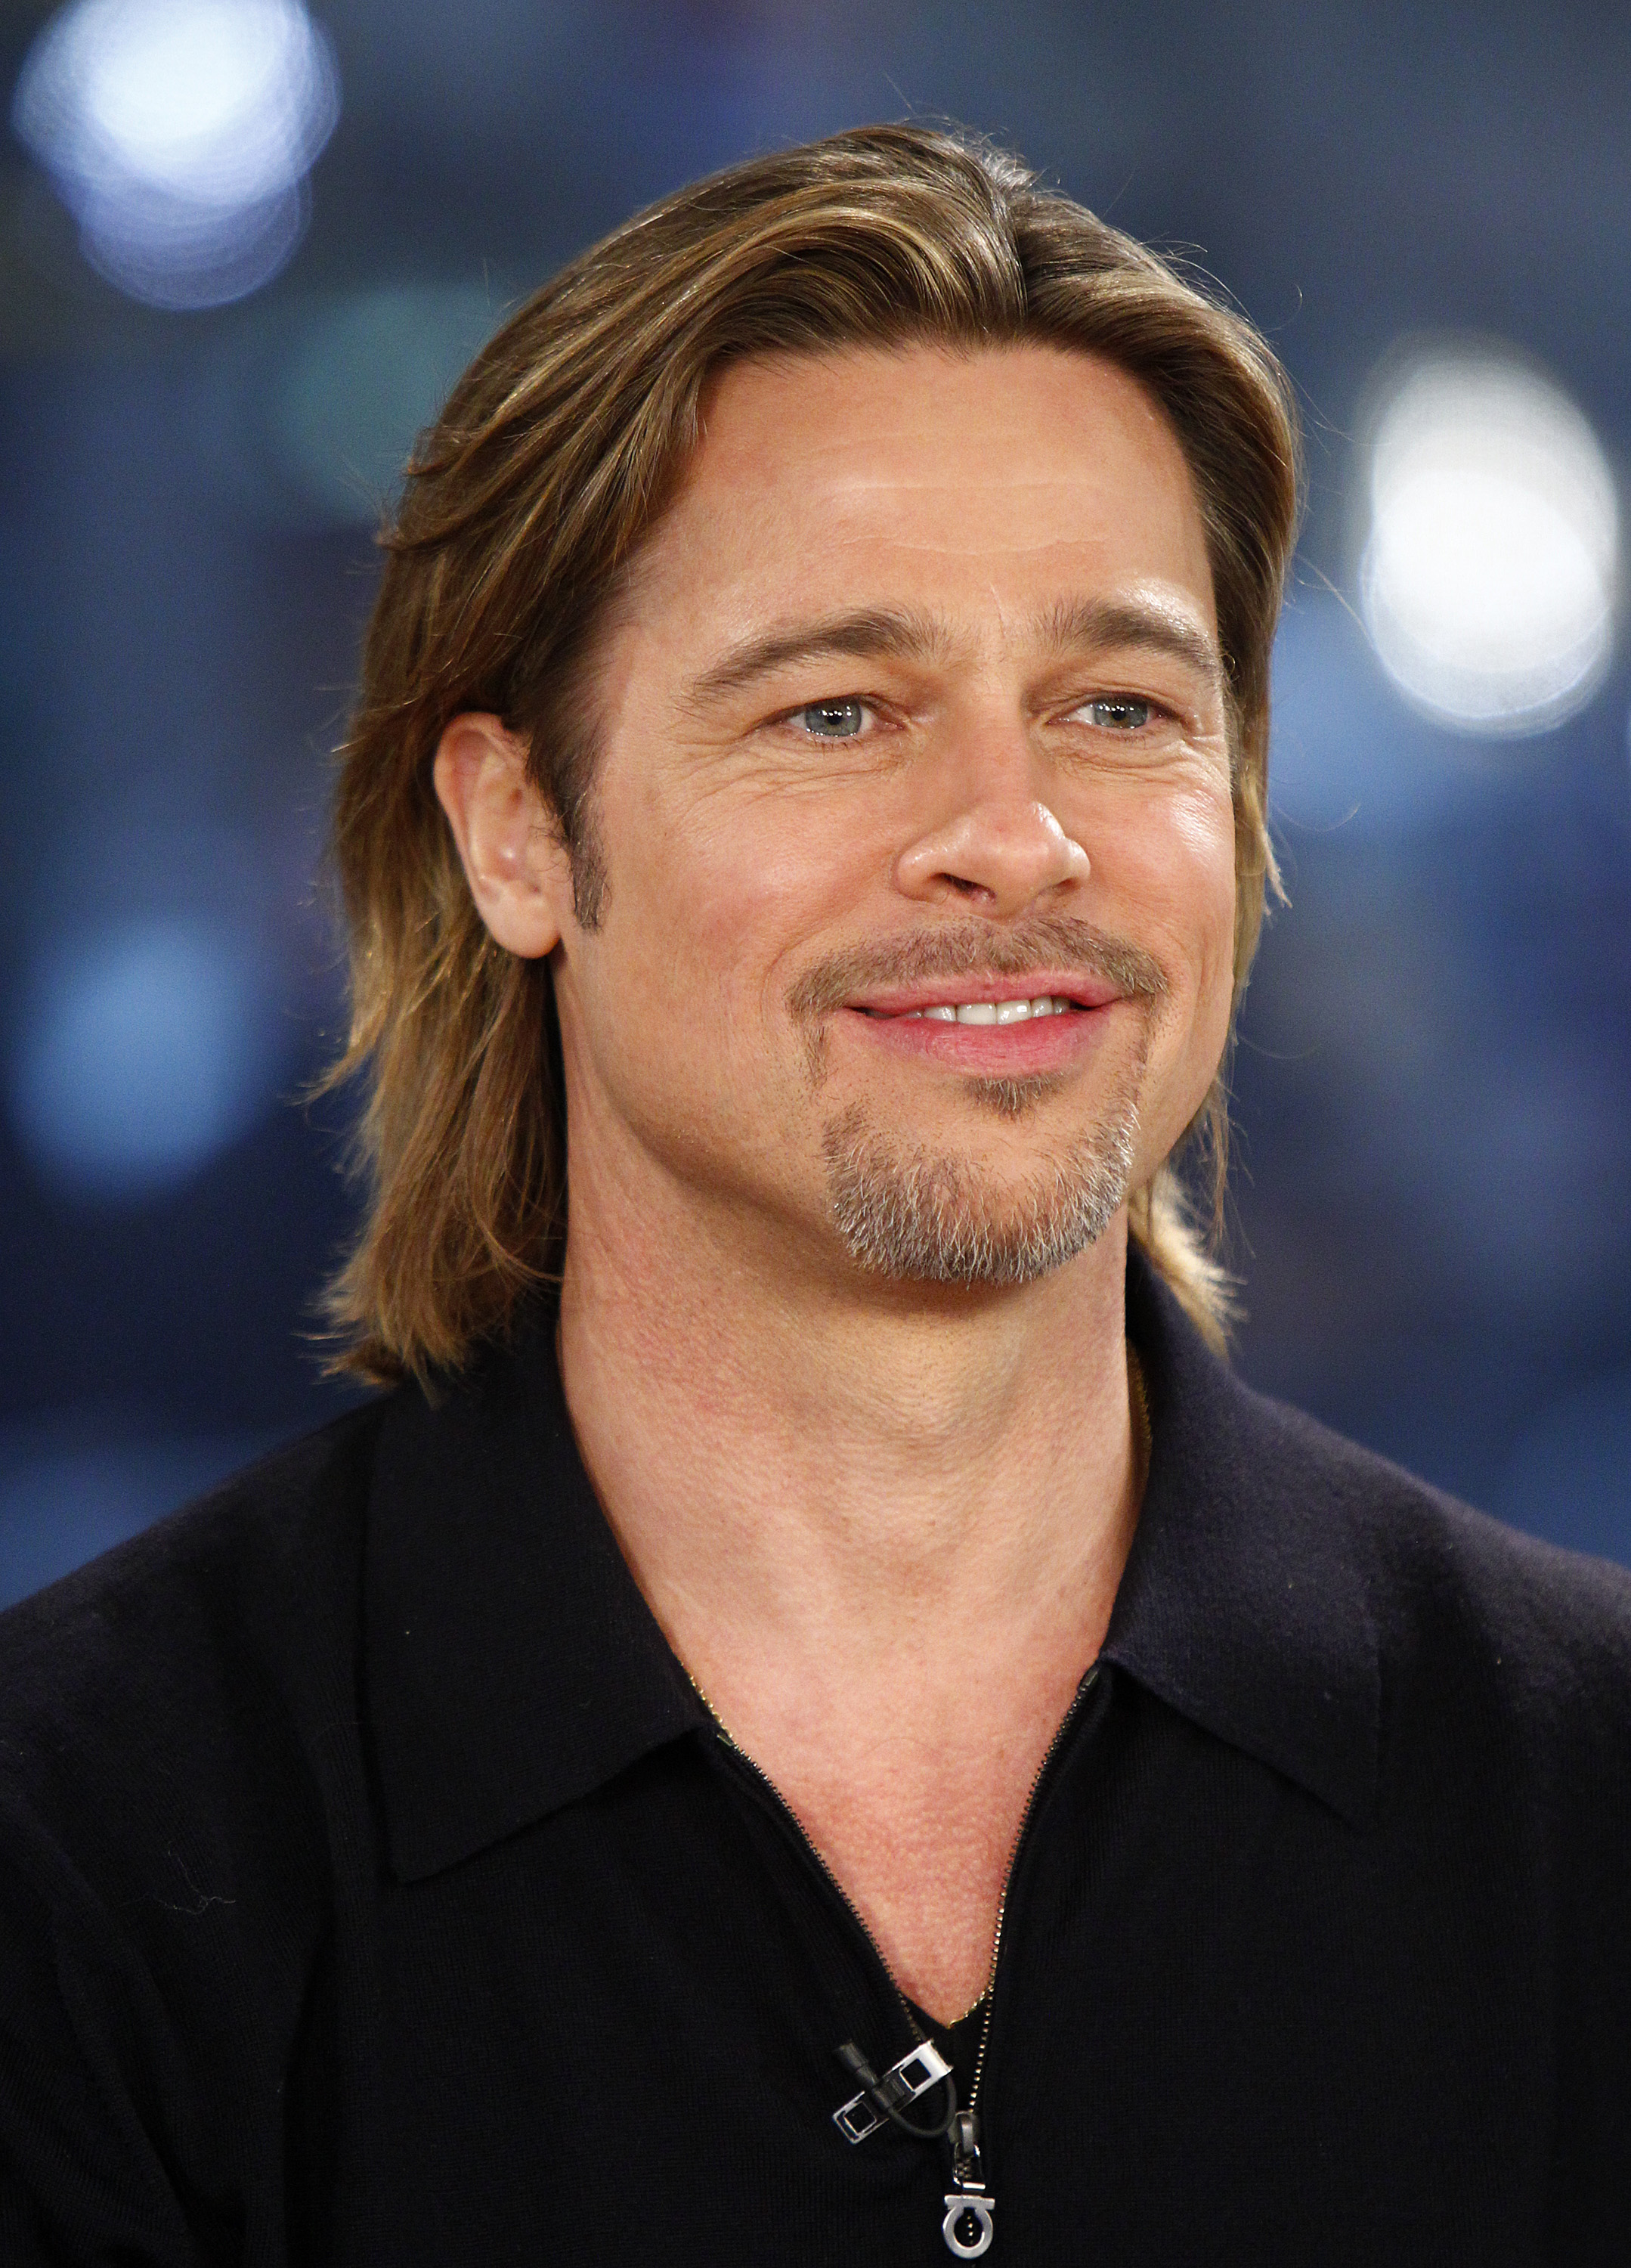 Brad Pitt appears on NBC News' "Today" show on February 1, 2012 | Source: Getty Images